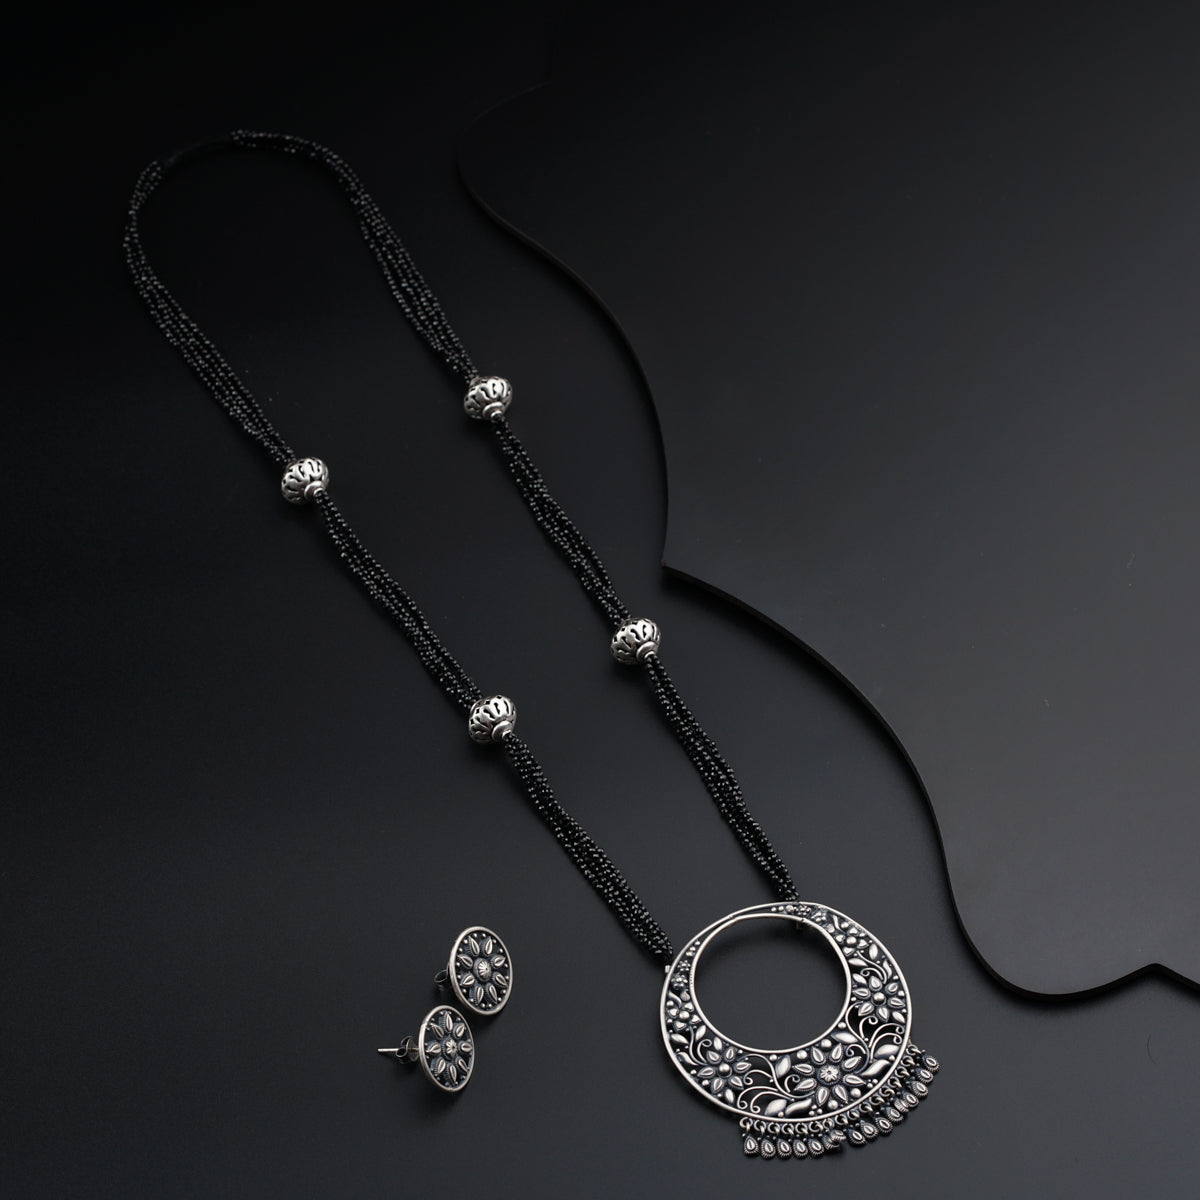 Chandbali Set with Black Spinel and Silver Beads